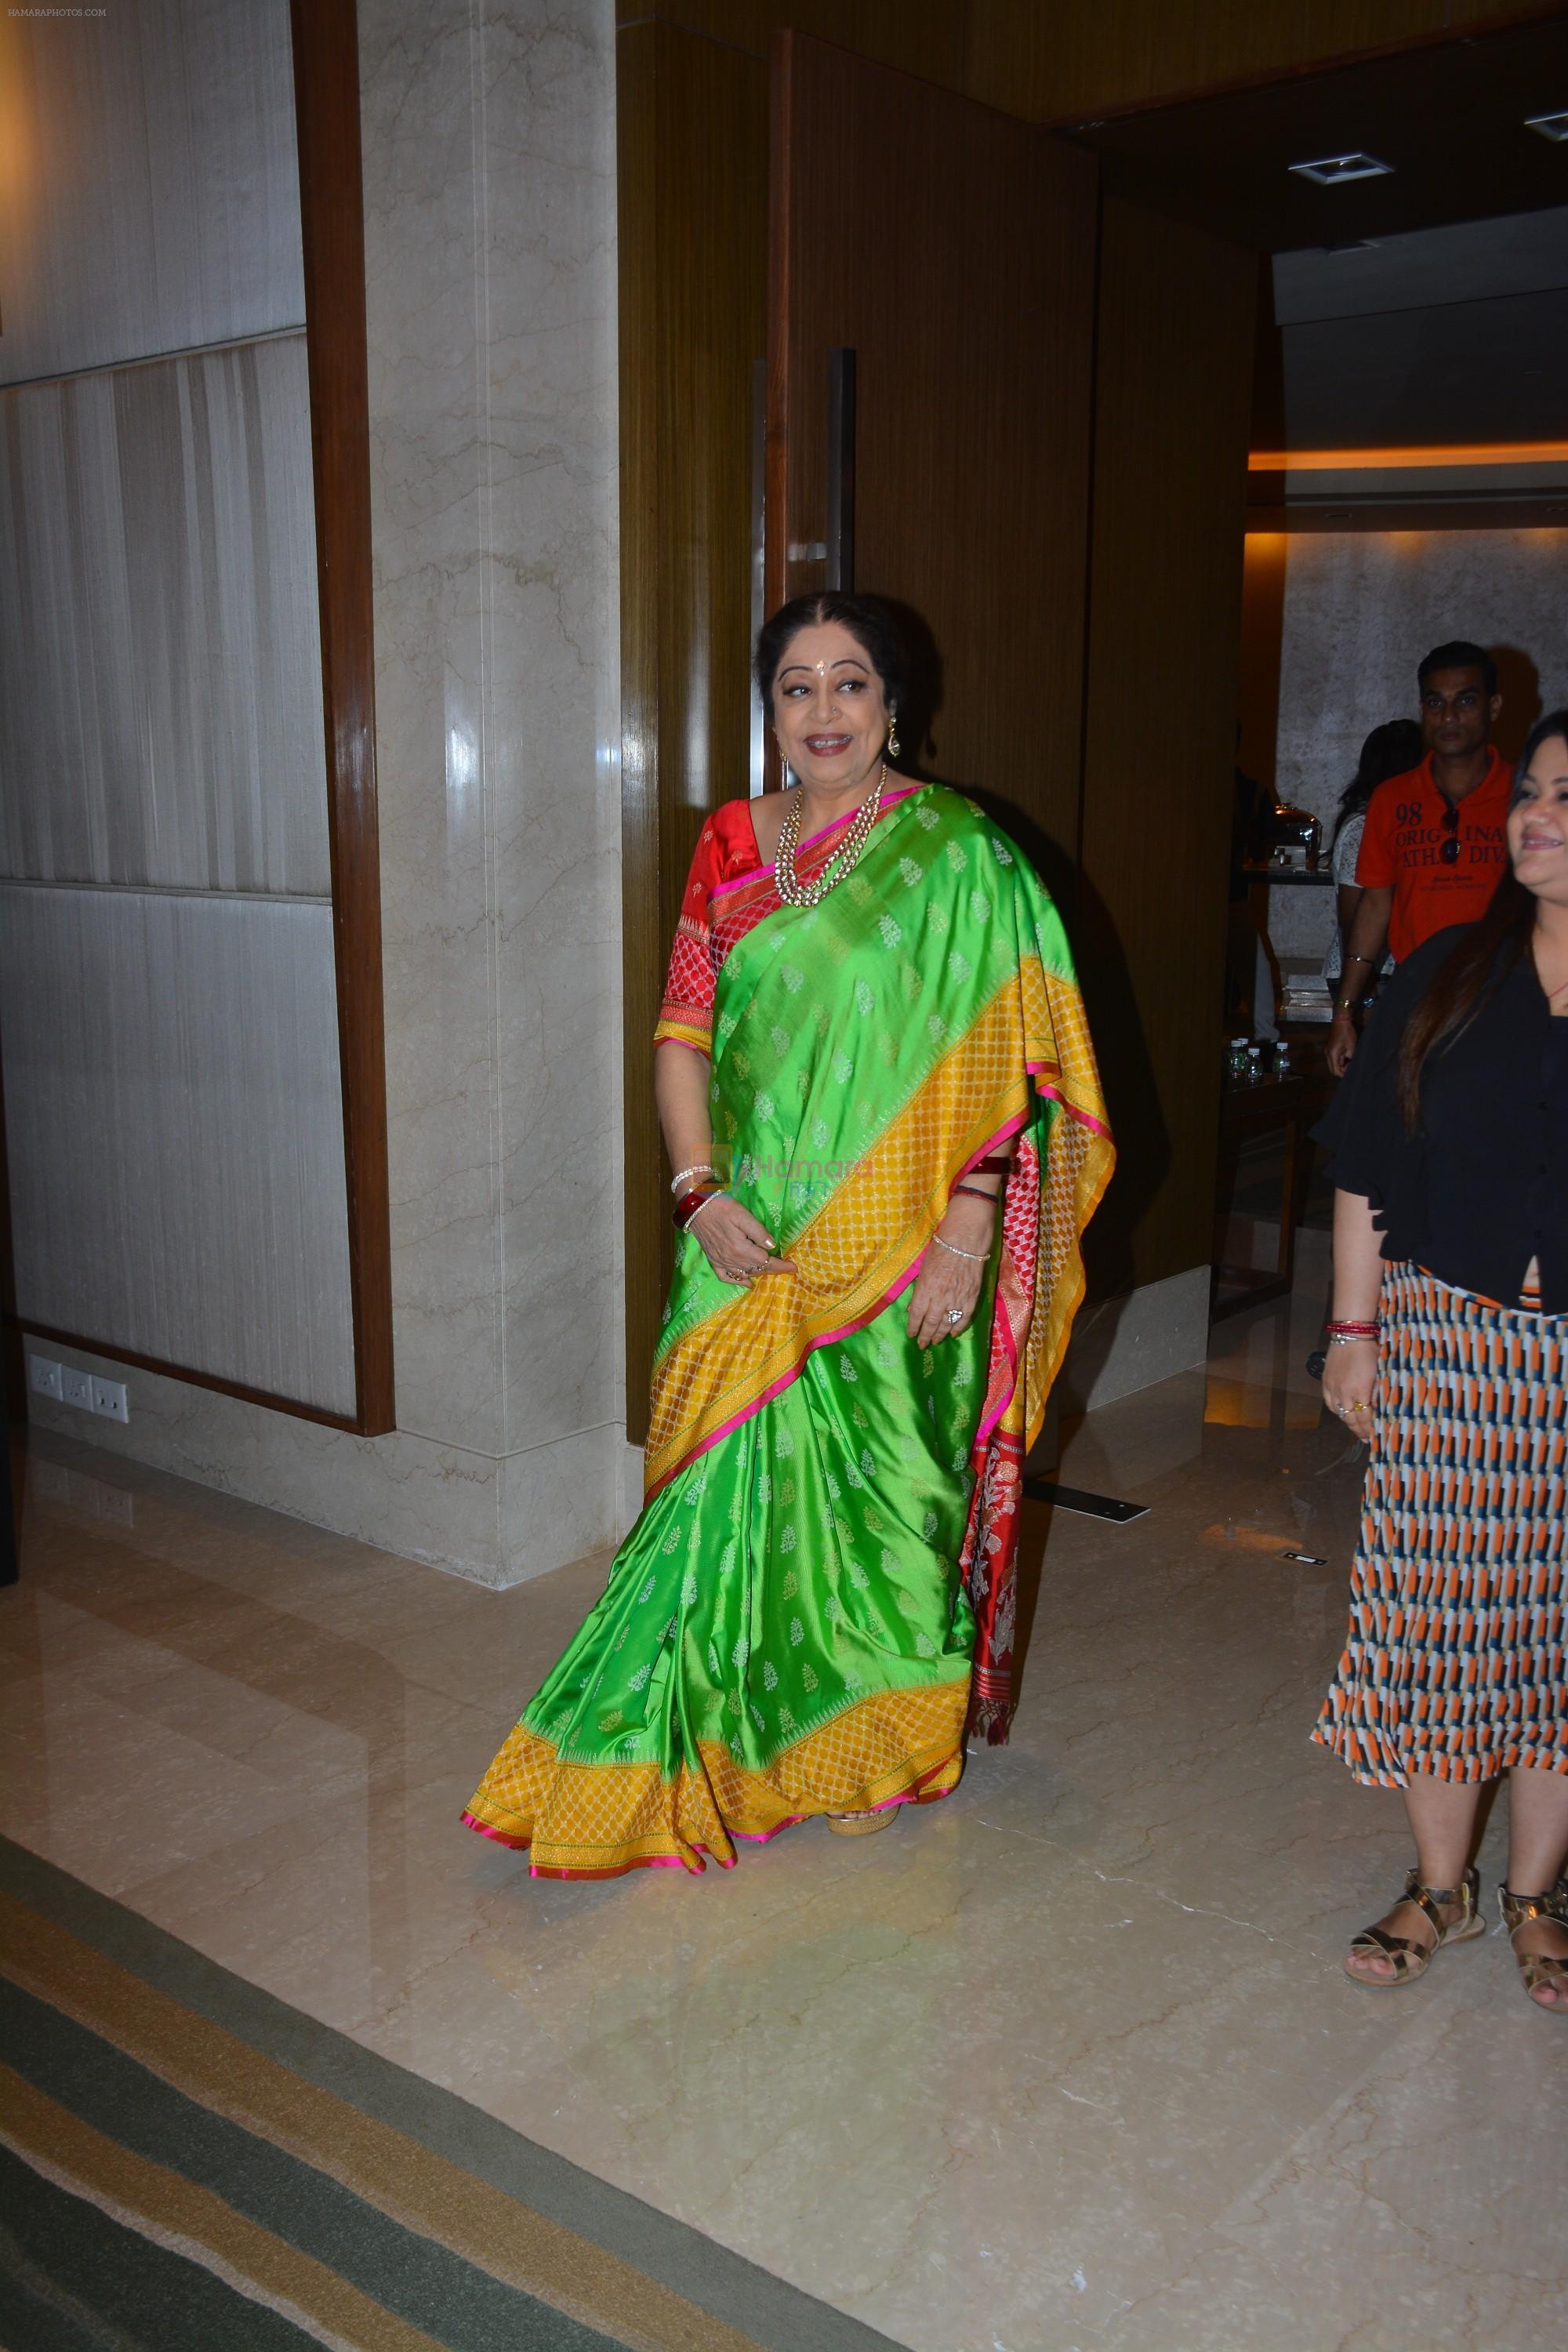 Kirron Kher at the Launch of India's got talent in Trident bkc on 14th Oct 2018